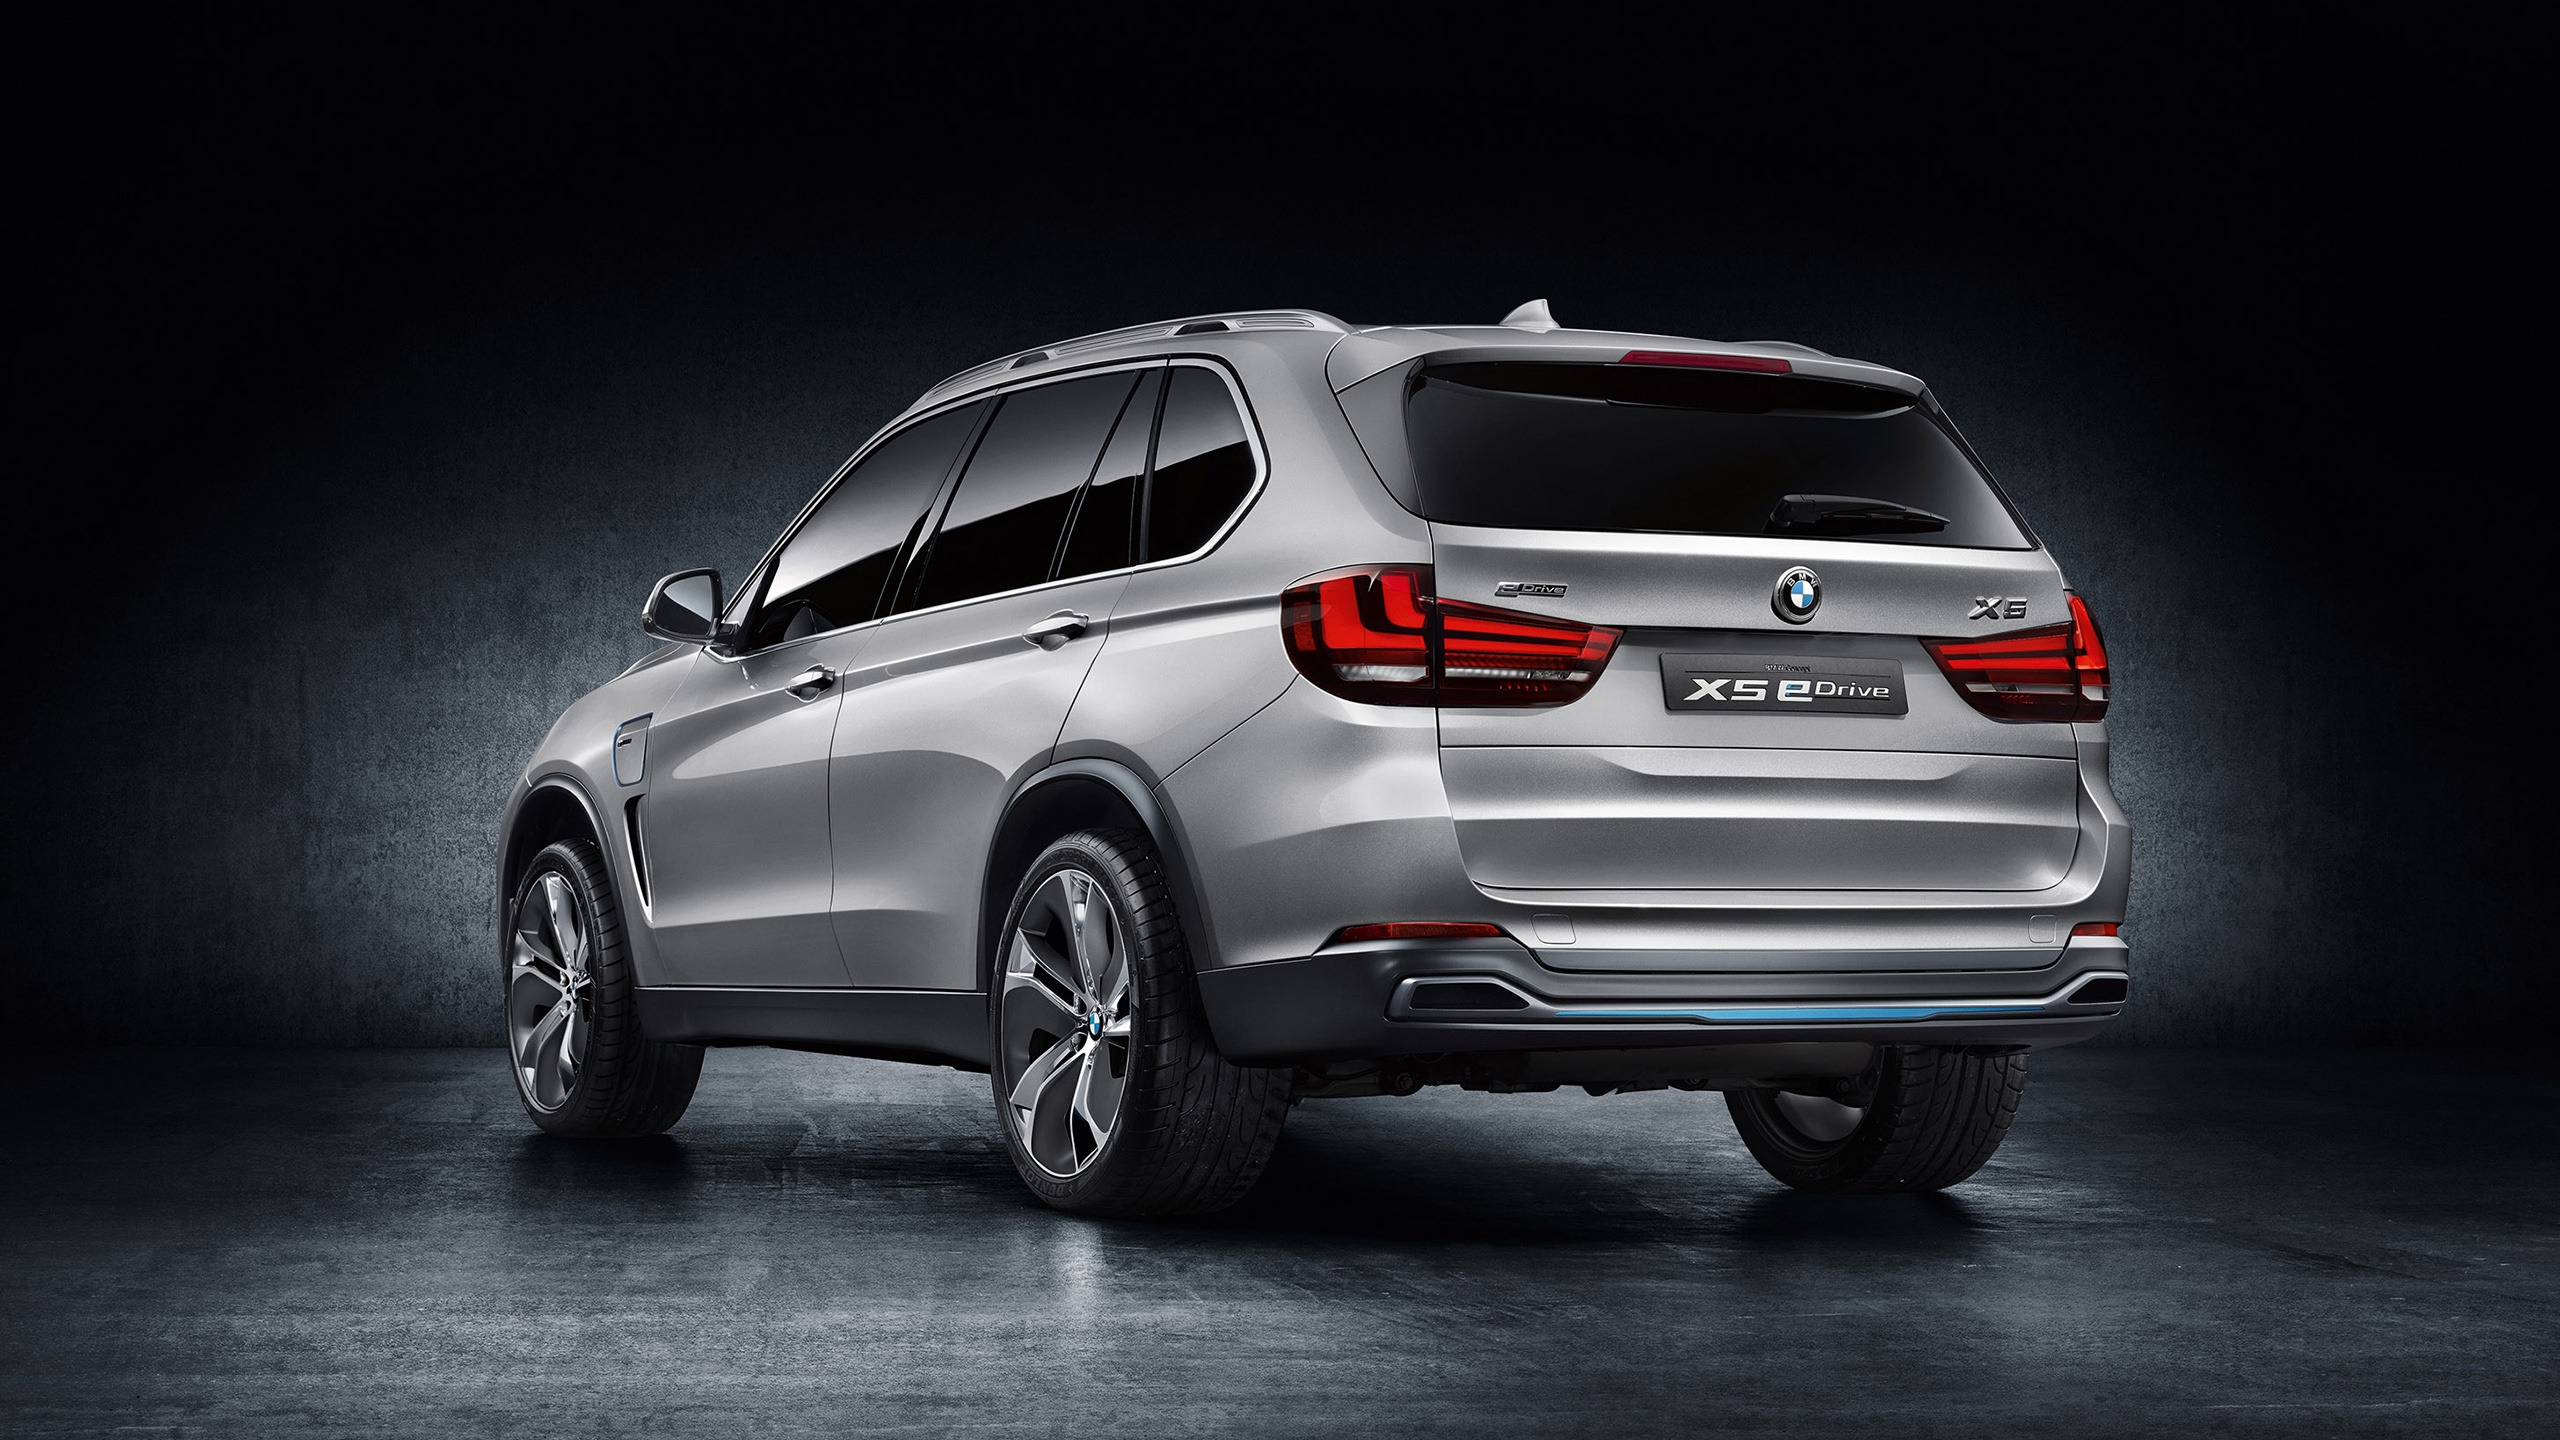 BMW X5 eDrive Concept Rear for 2560x1440 HDTV resolution